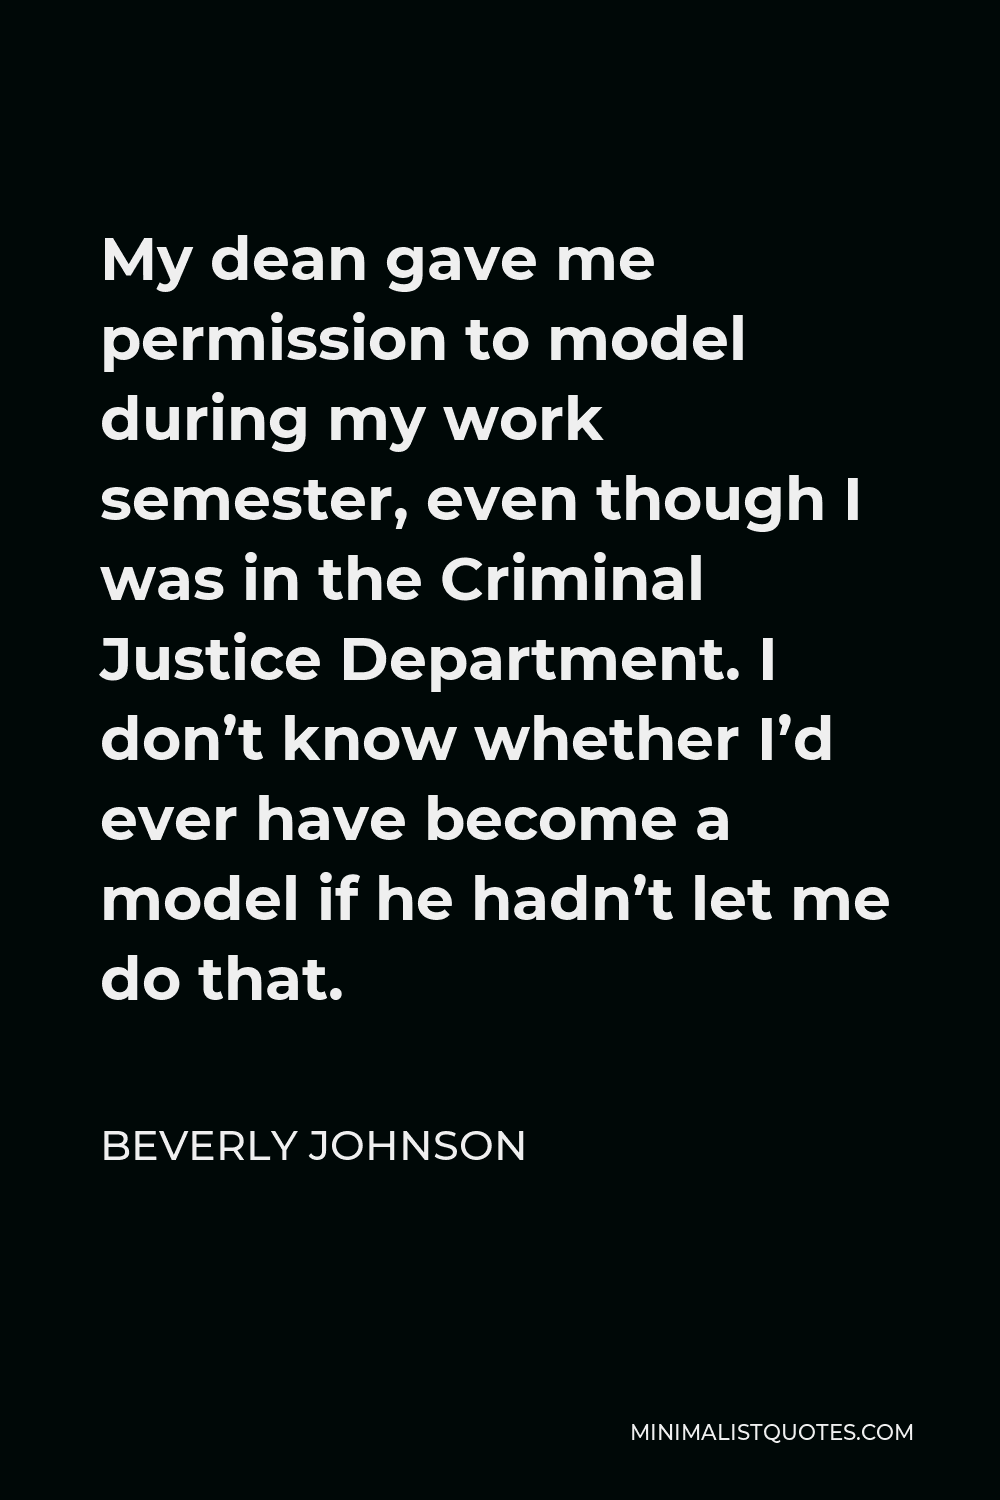 Beverly Johnson Quote - My dean gave me permission to model during my work semester, even though I was in the Criminal Justice Department. I don’t know whether I’d ever have become a model if he hadn’t let me do that.